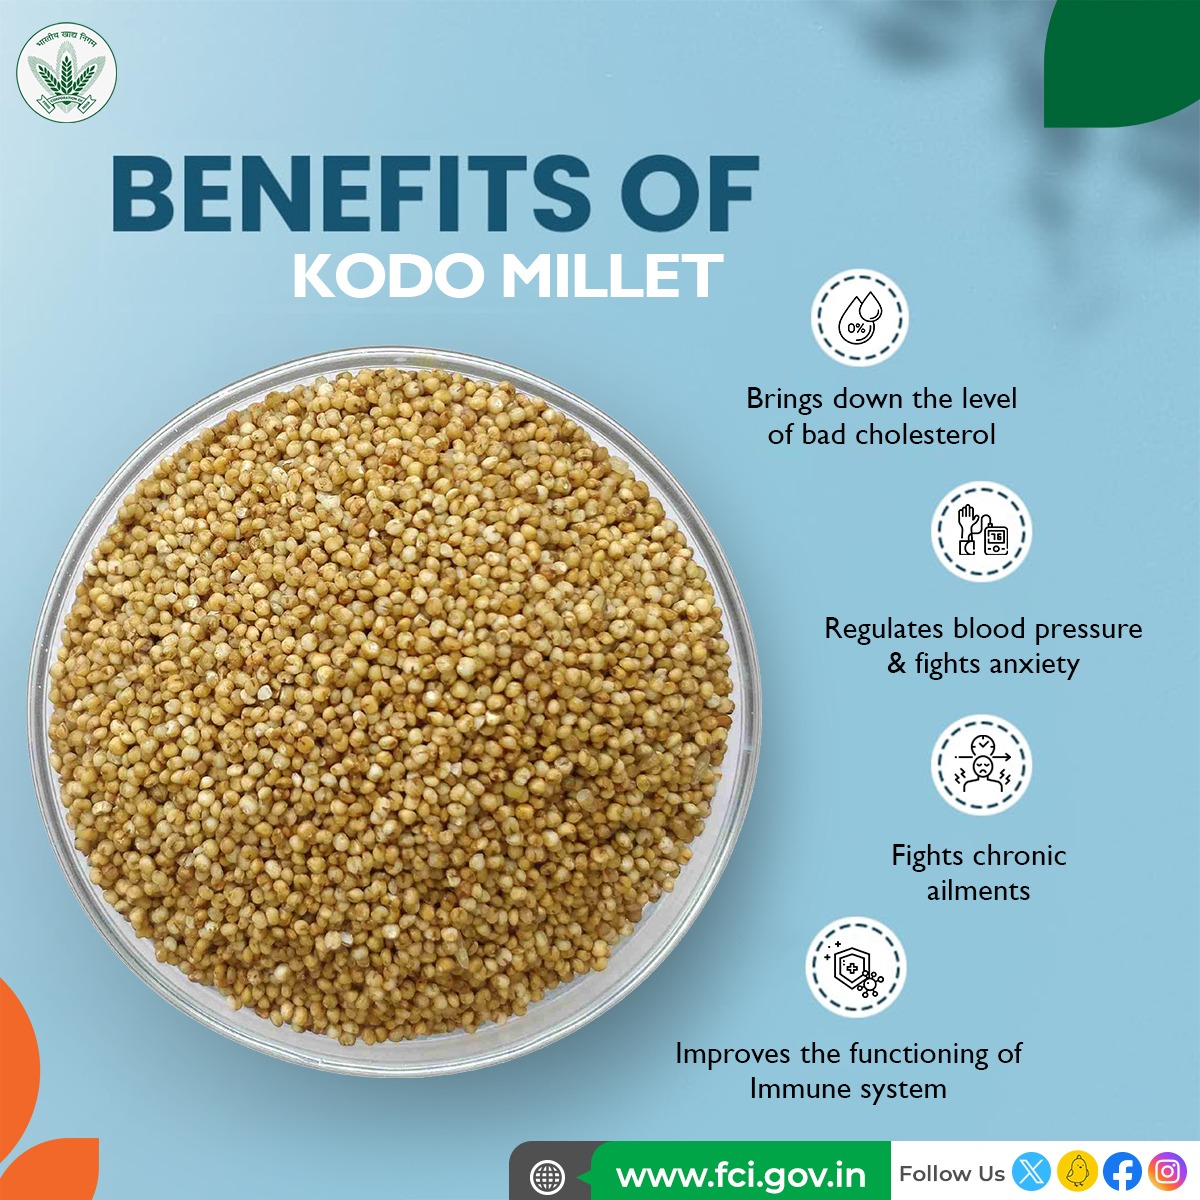 Kodo Millet is a nutritious ancient grain packed with benefits for a balanced diet and sustainable agriculture. Discover the goodness of Kodo Millet!